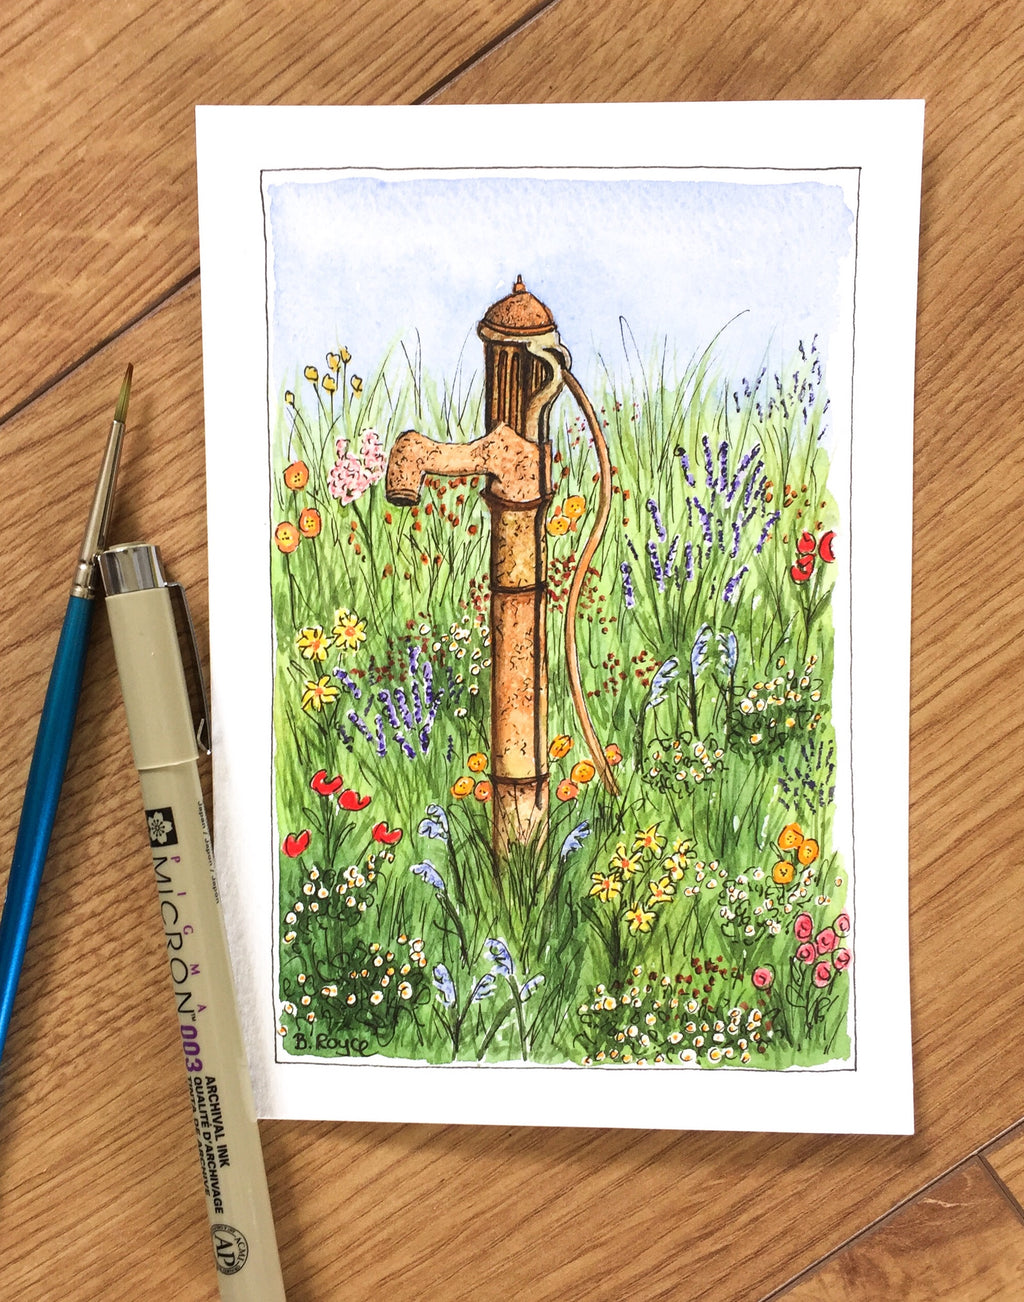 Wildflowers and standpipe